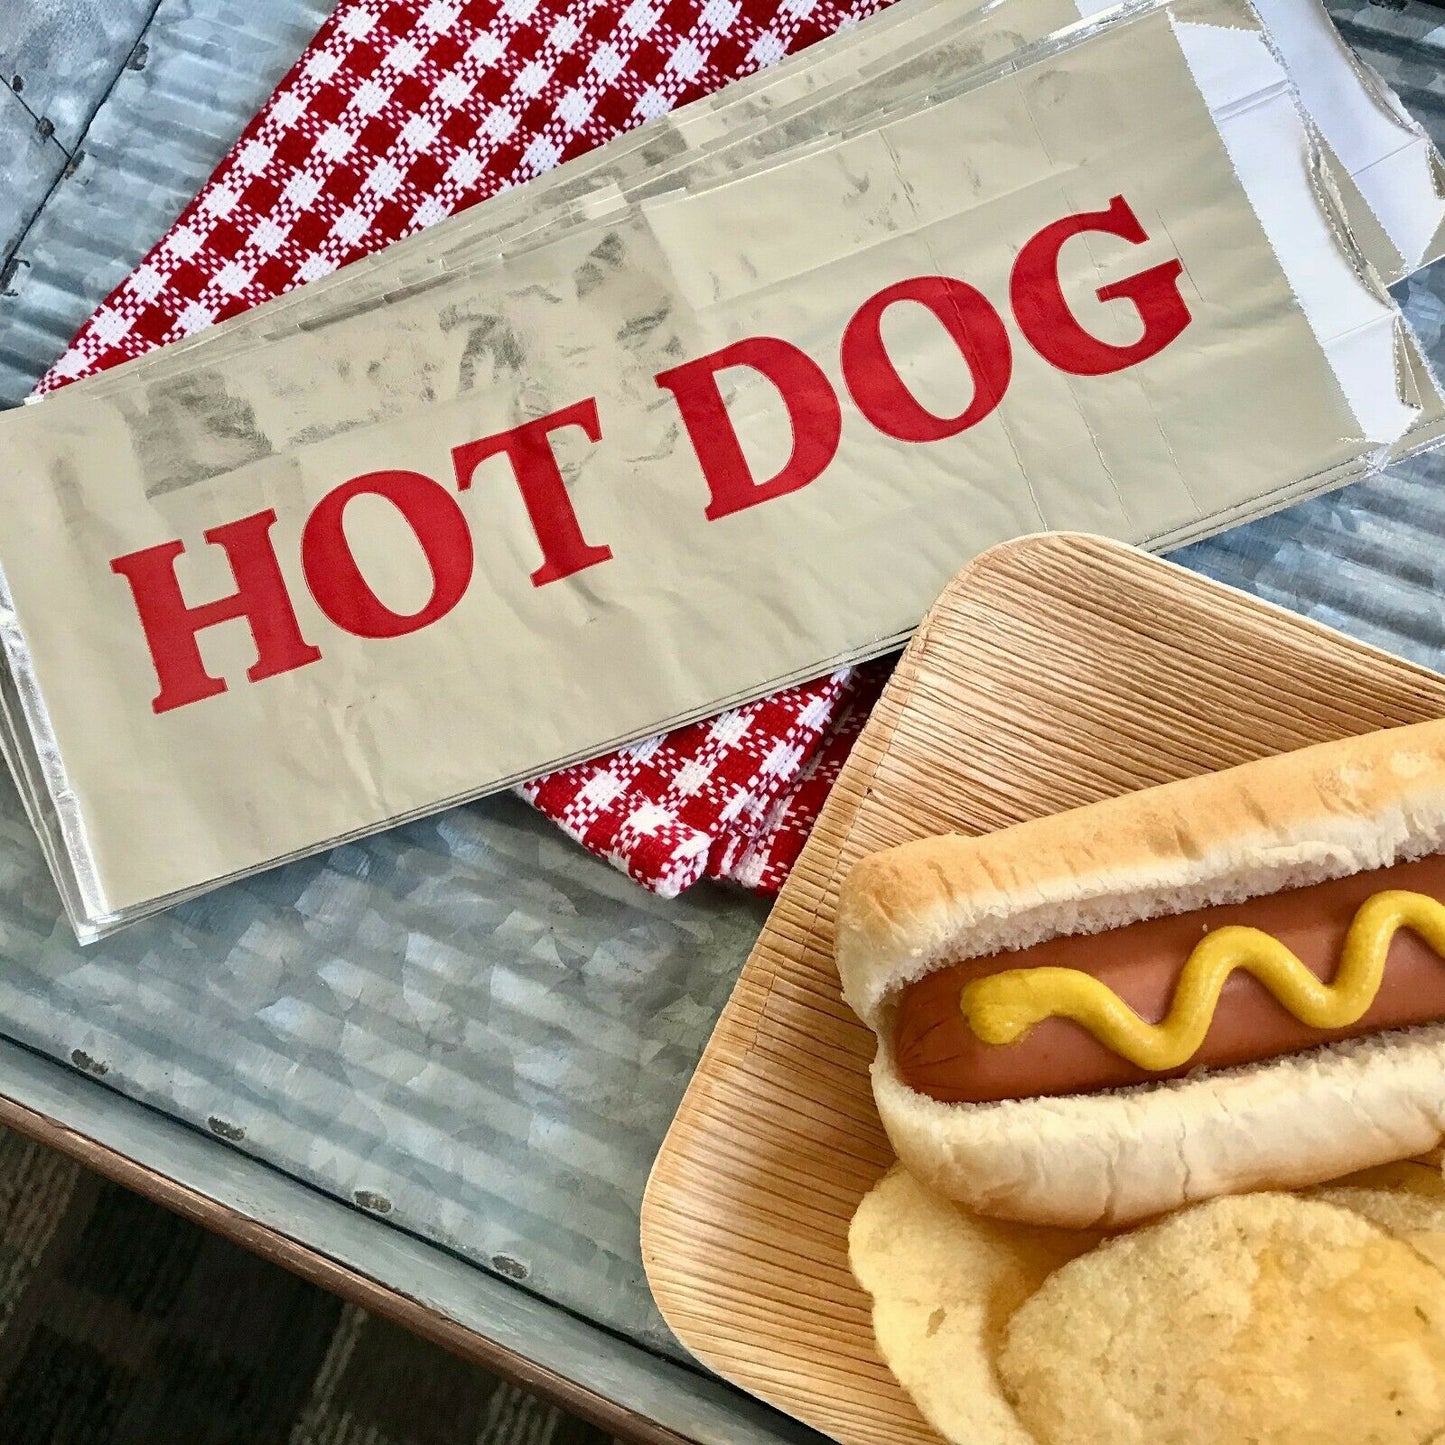 Silver Foil Hot Dog Bags . Concession Stand or Carnival Food Bags . 3 1/2" x 1 1/2" x 9" . Qty 25 - Scrap Bits